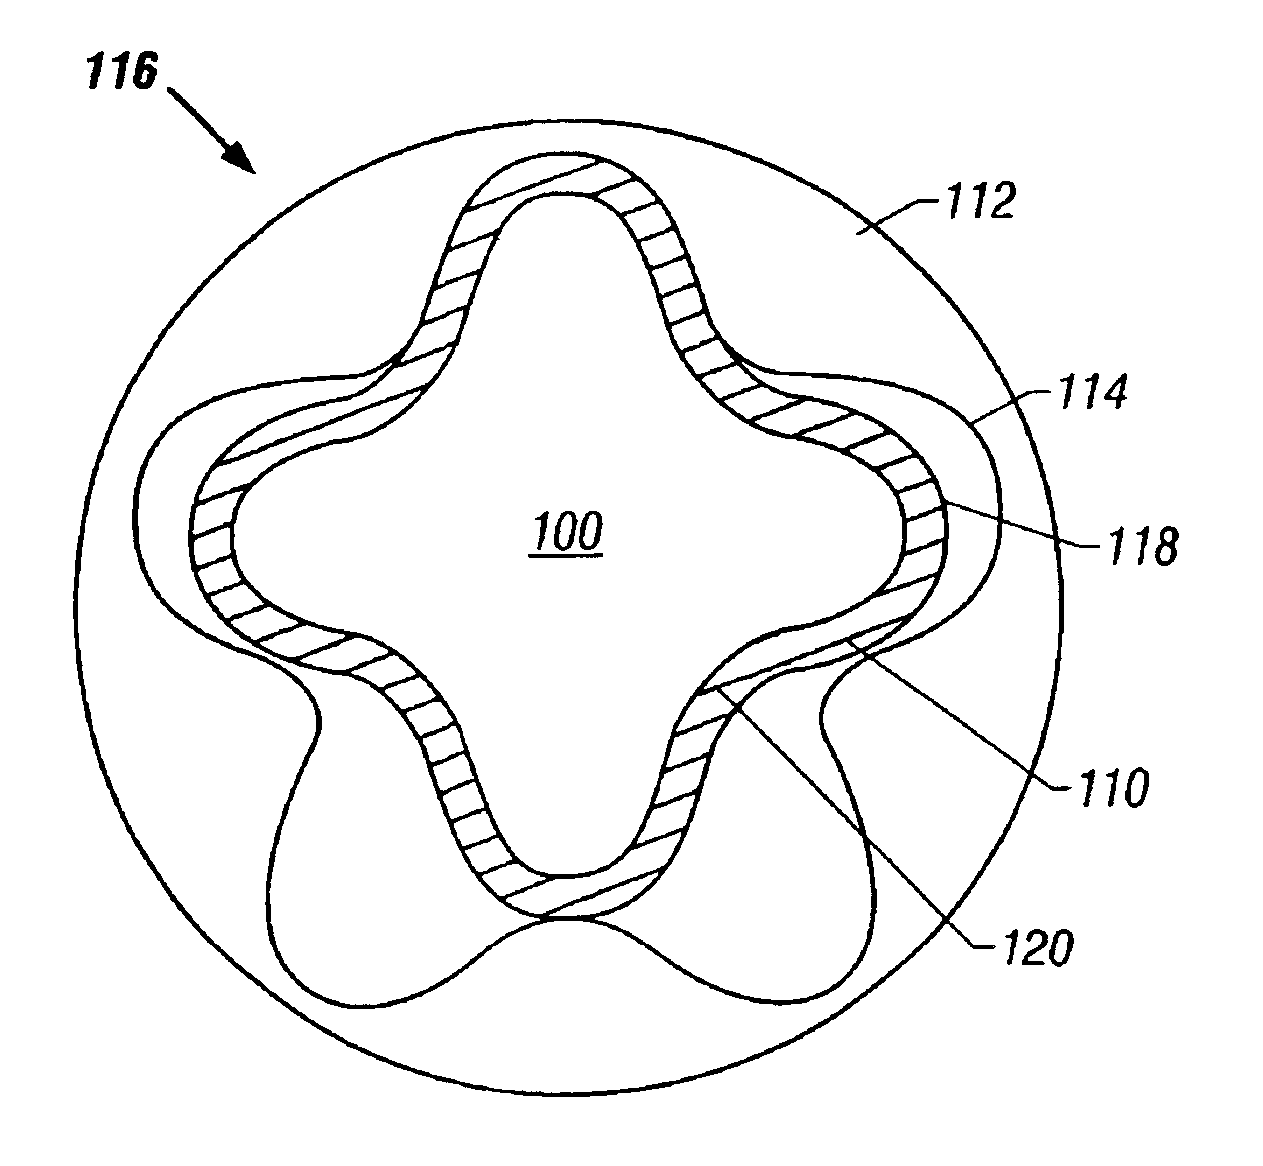 Method of forming an optimized fiber reinforced liner on a rotor with a motor